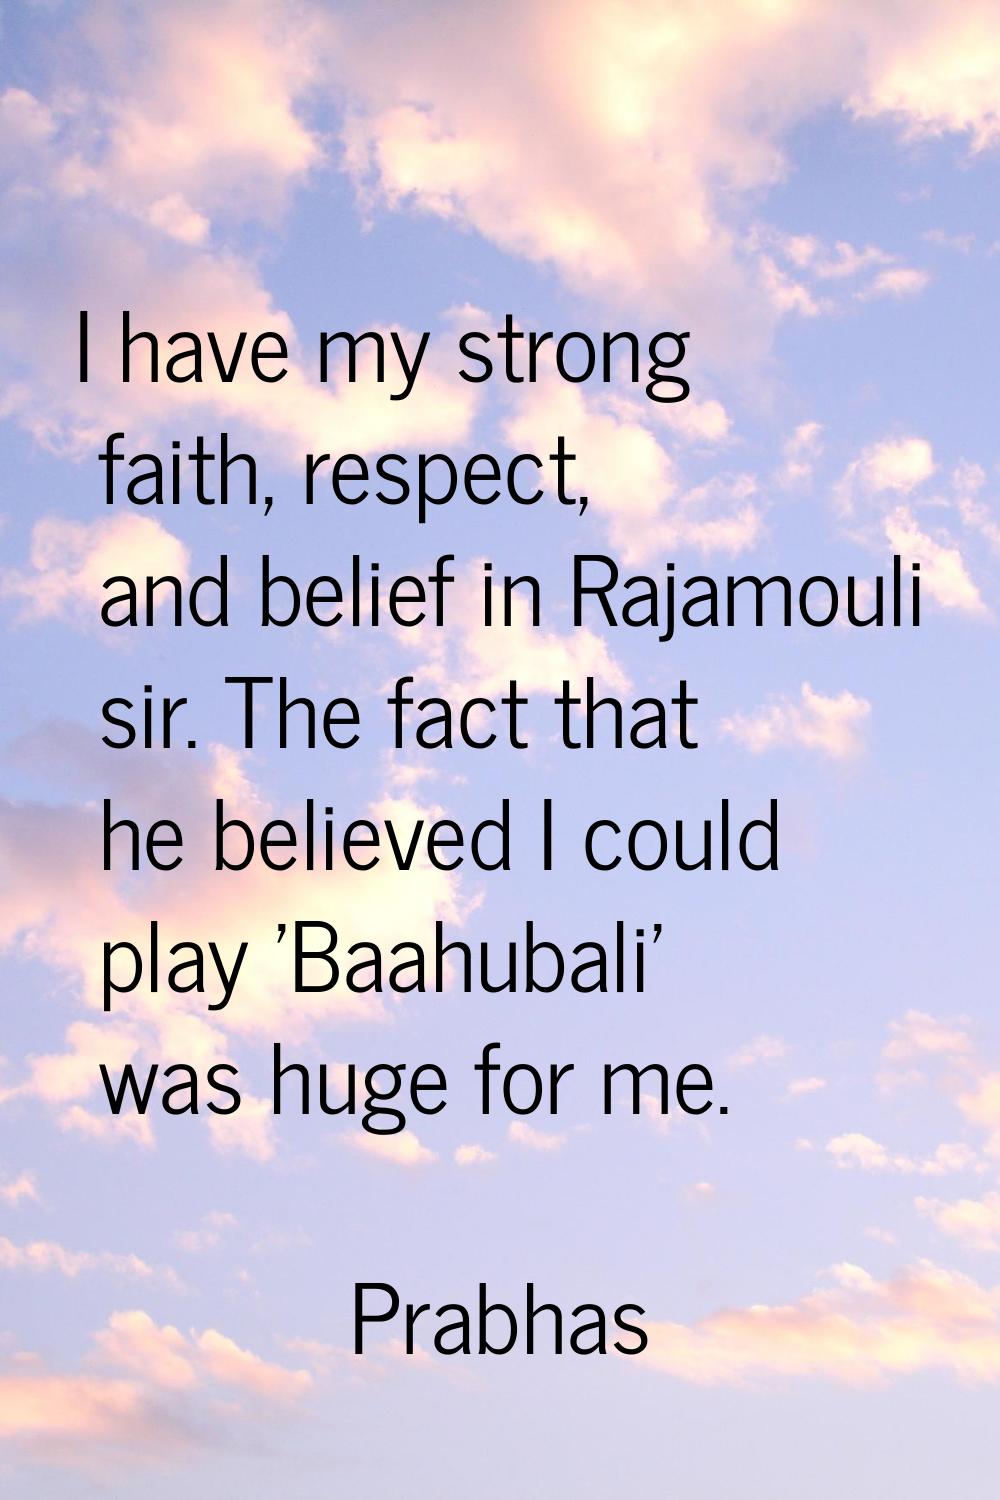 I have my strong faith, respect, and belief in Rajamouli sir. The fact that he believed I could pla